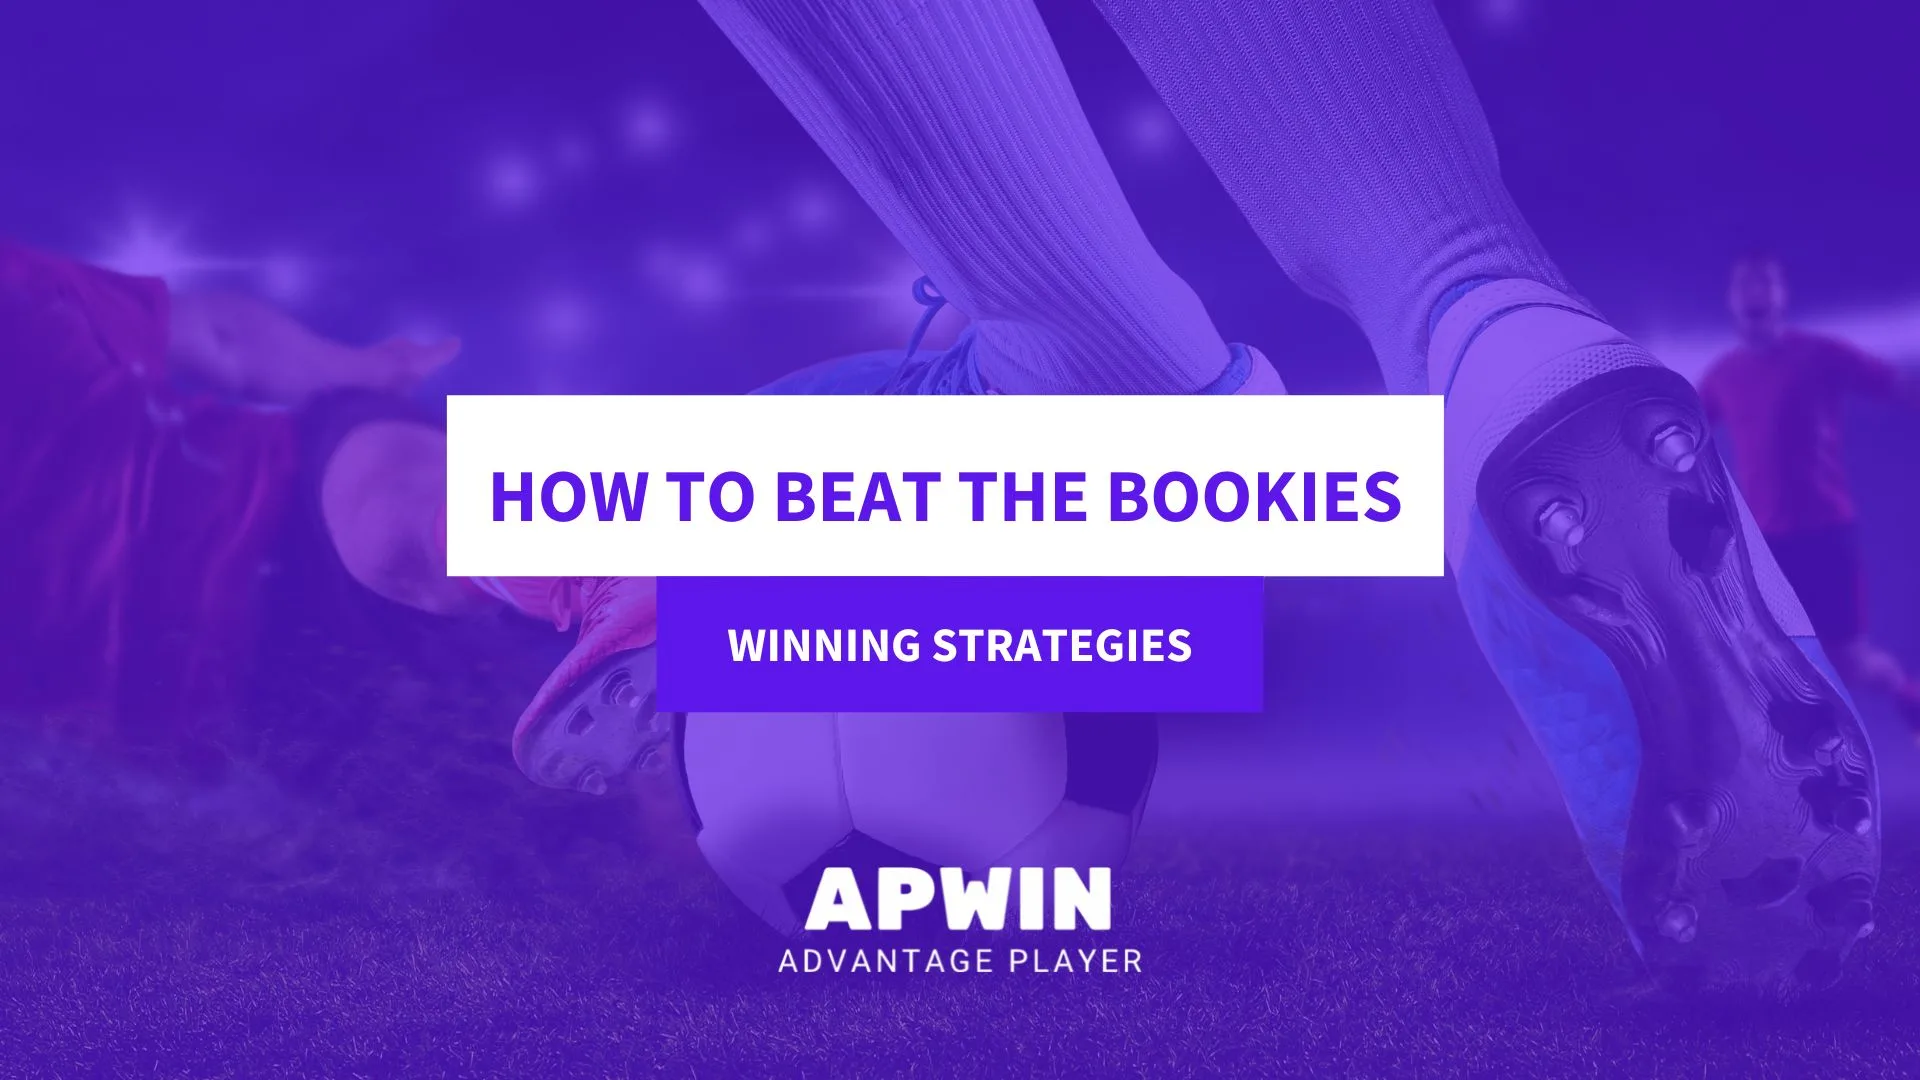 Photo: how to beat the bookies sports betting